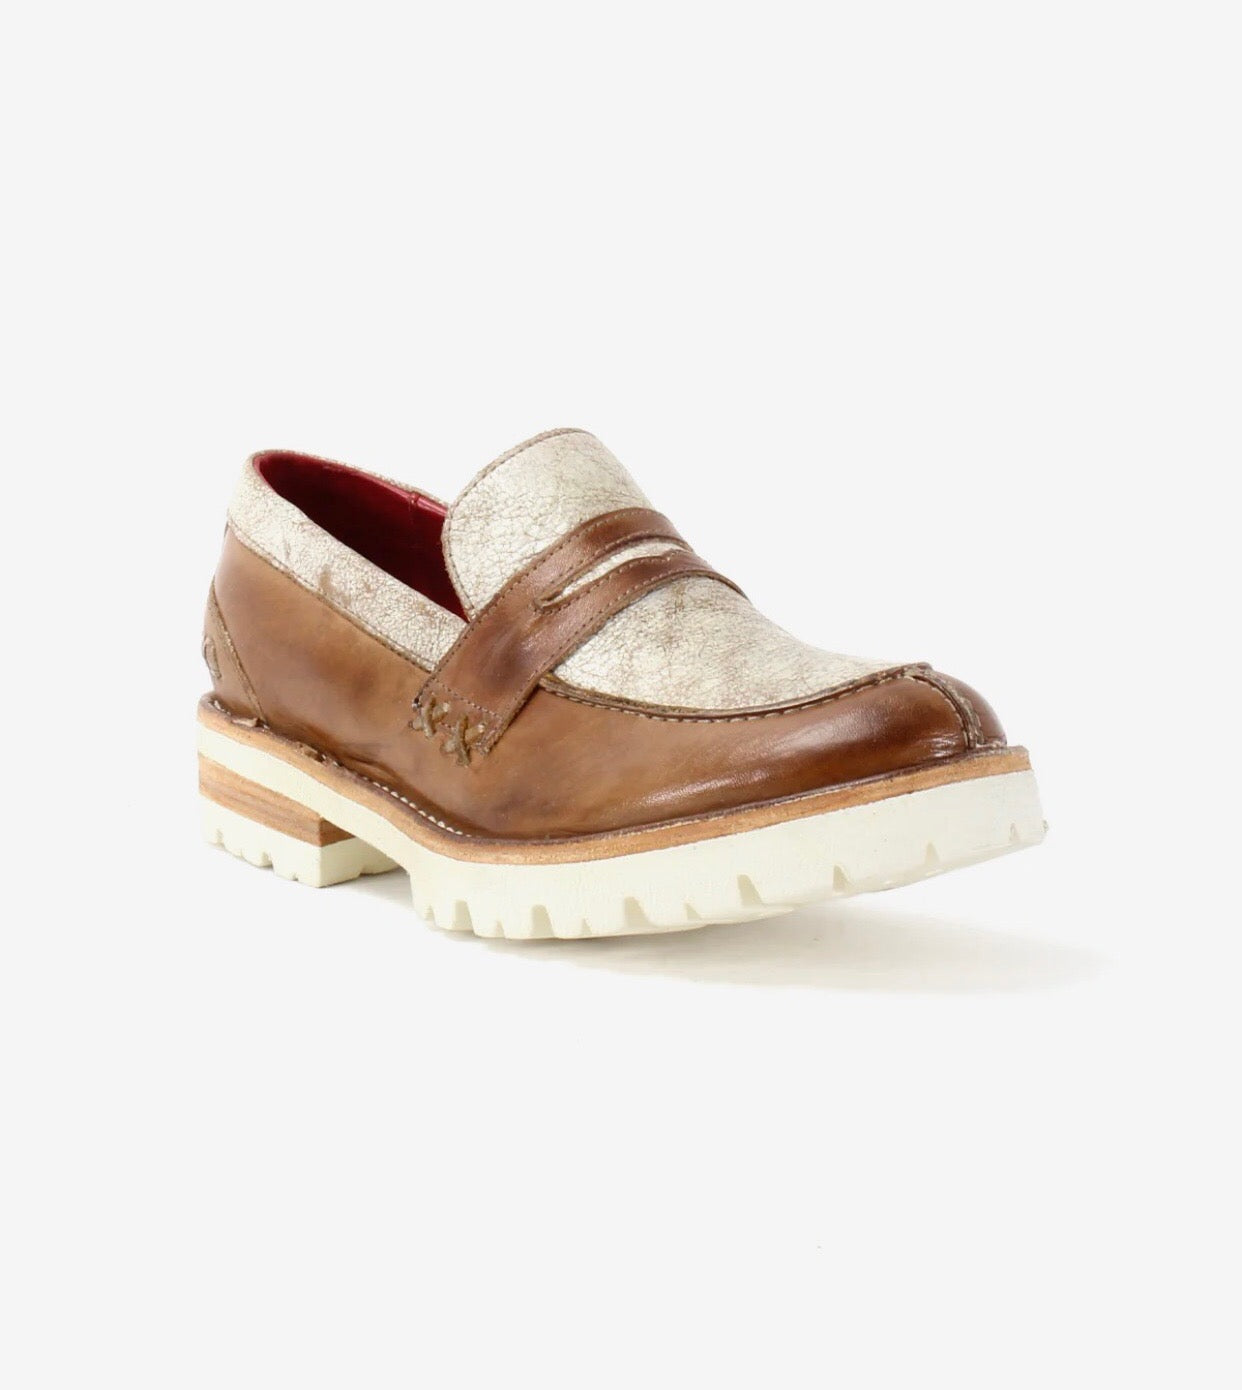 BED|STU Reina III Penny Loafer Tan Rustic/Nectar Lux